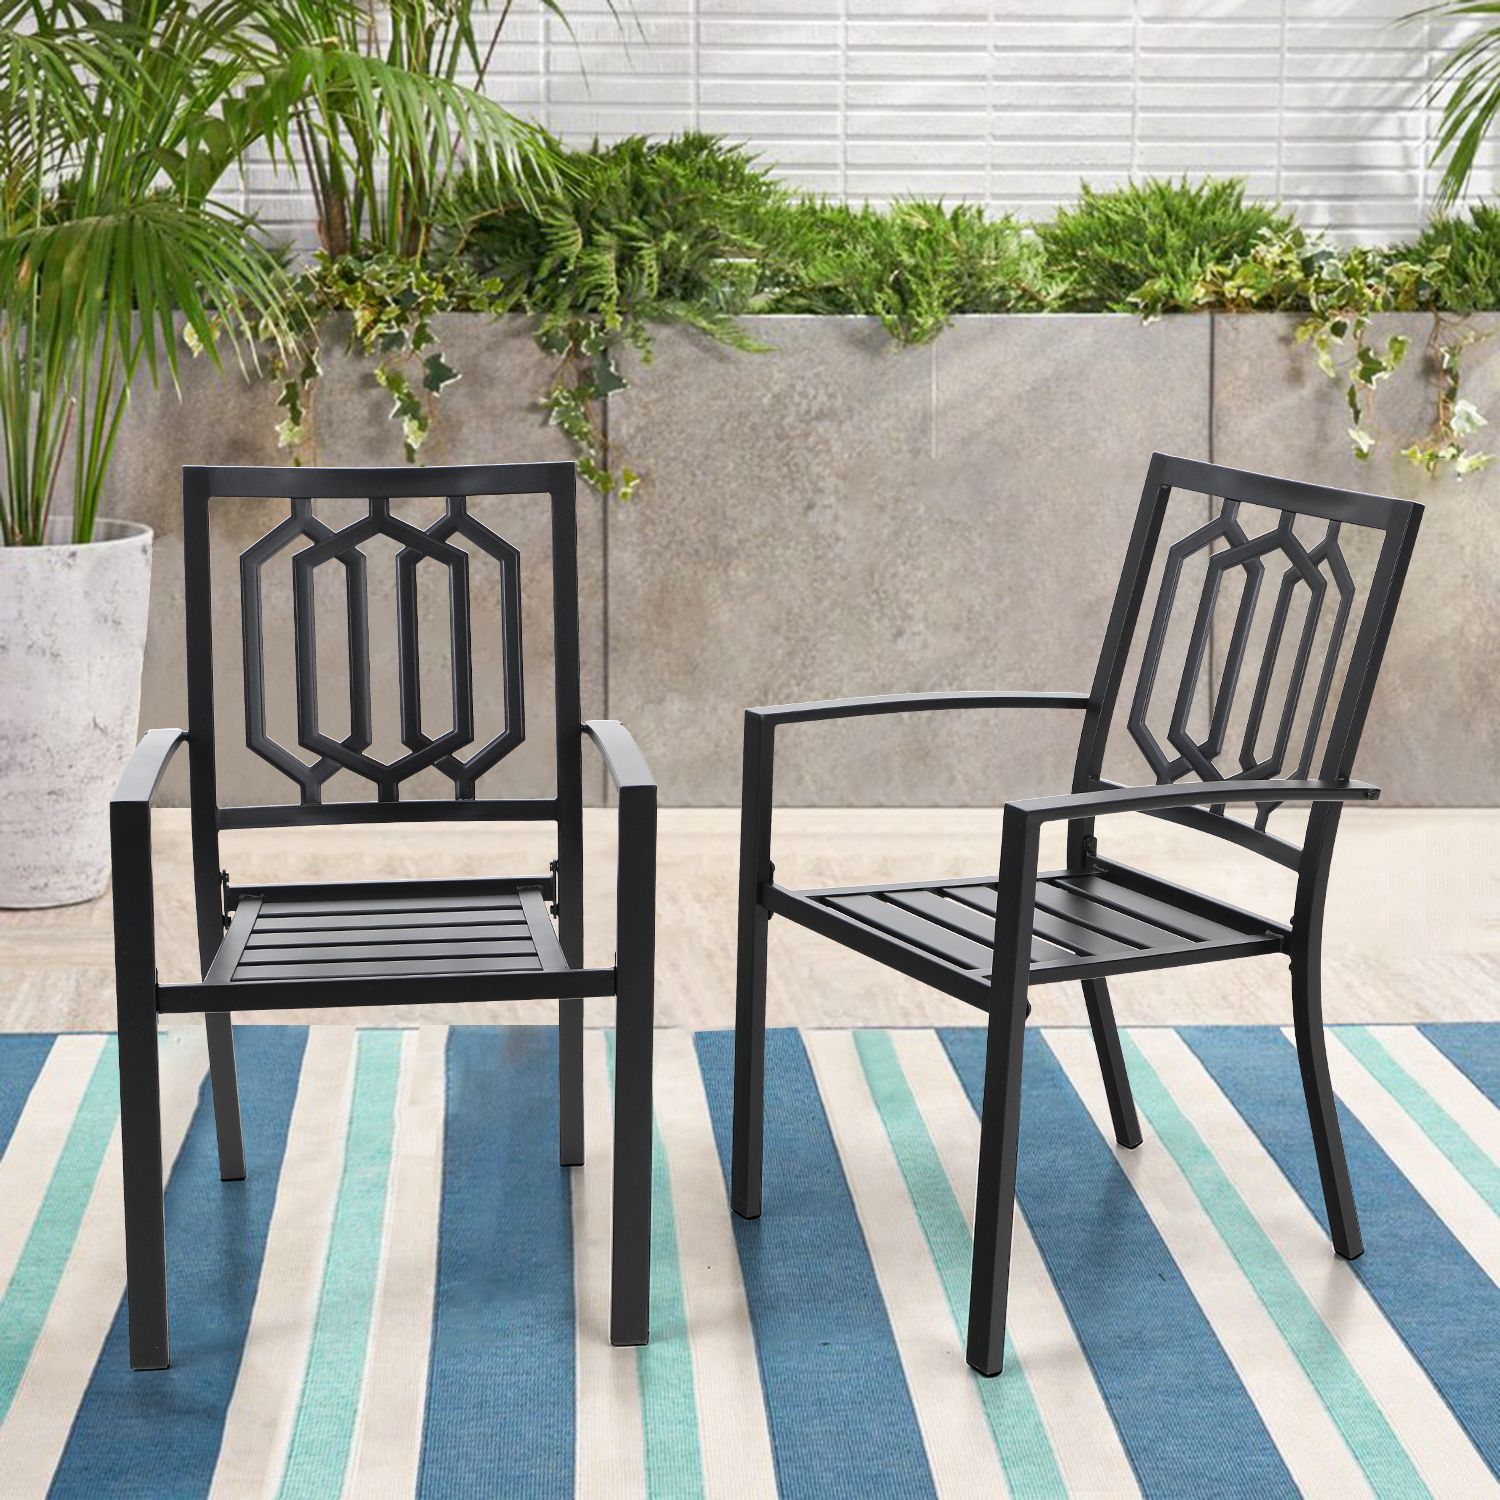 Black Outdoor Dining Chairs Regarding Best And Newest Mf Studio Outdoor Chairs Set Of 2, Iron Metal Dining 300 Lbs Weight (View 15 of 15)